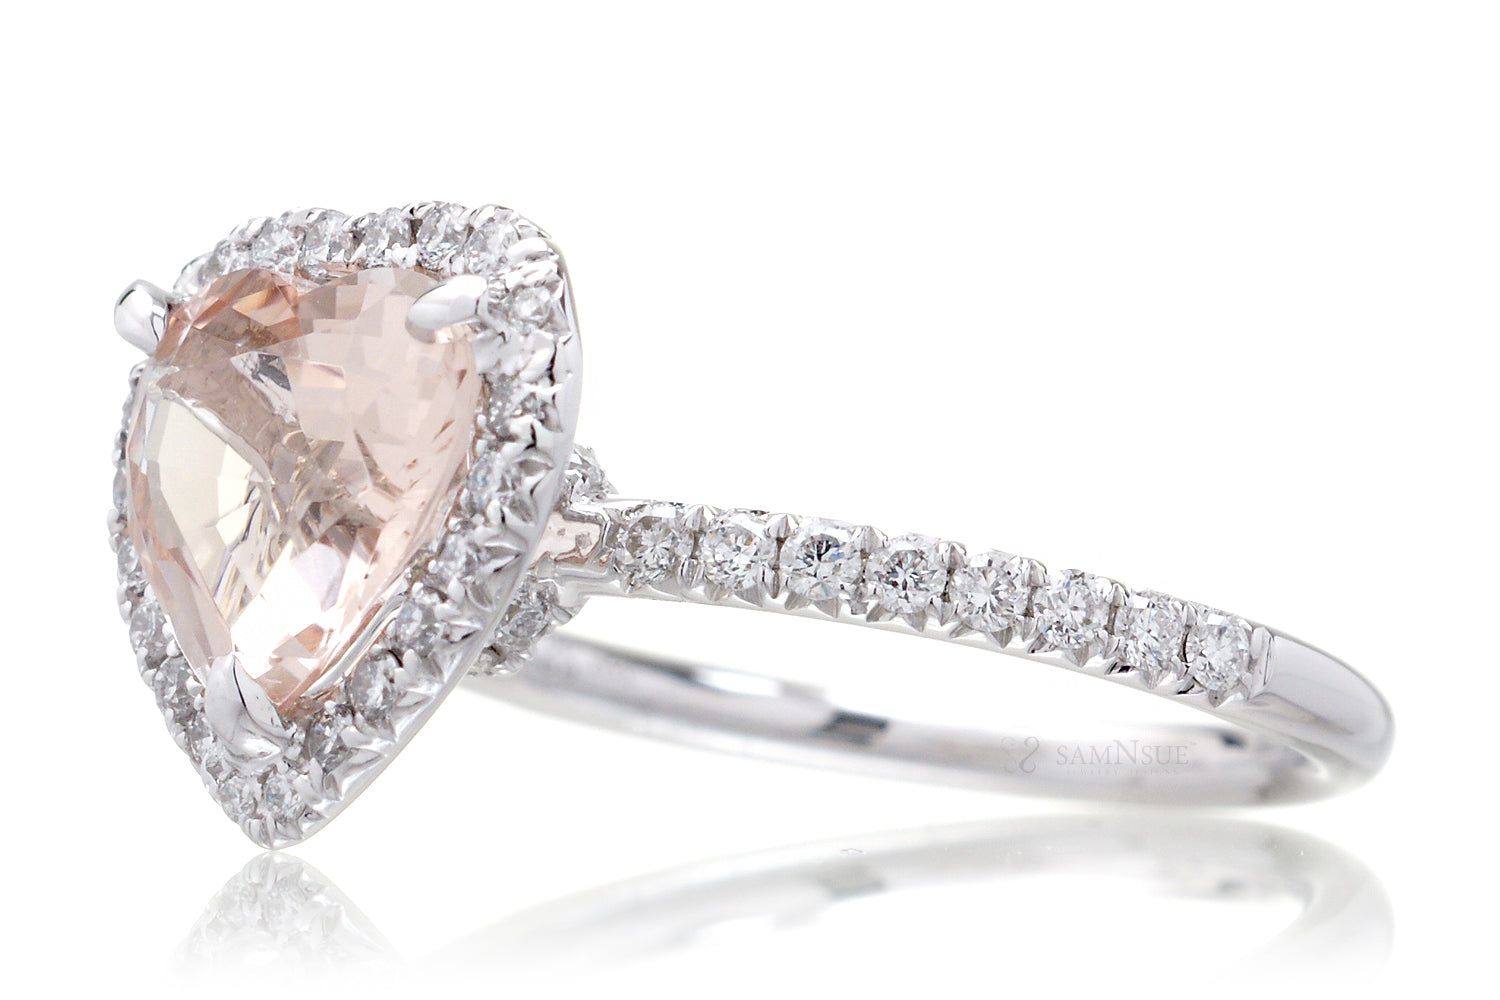 The Drenched Heart Morganite (8.5mm)